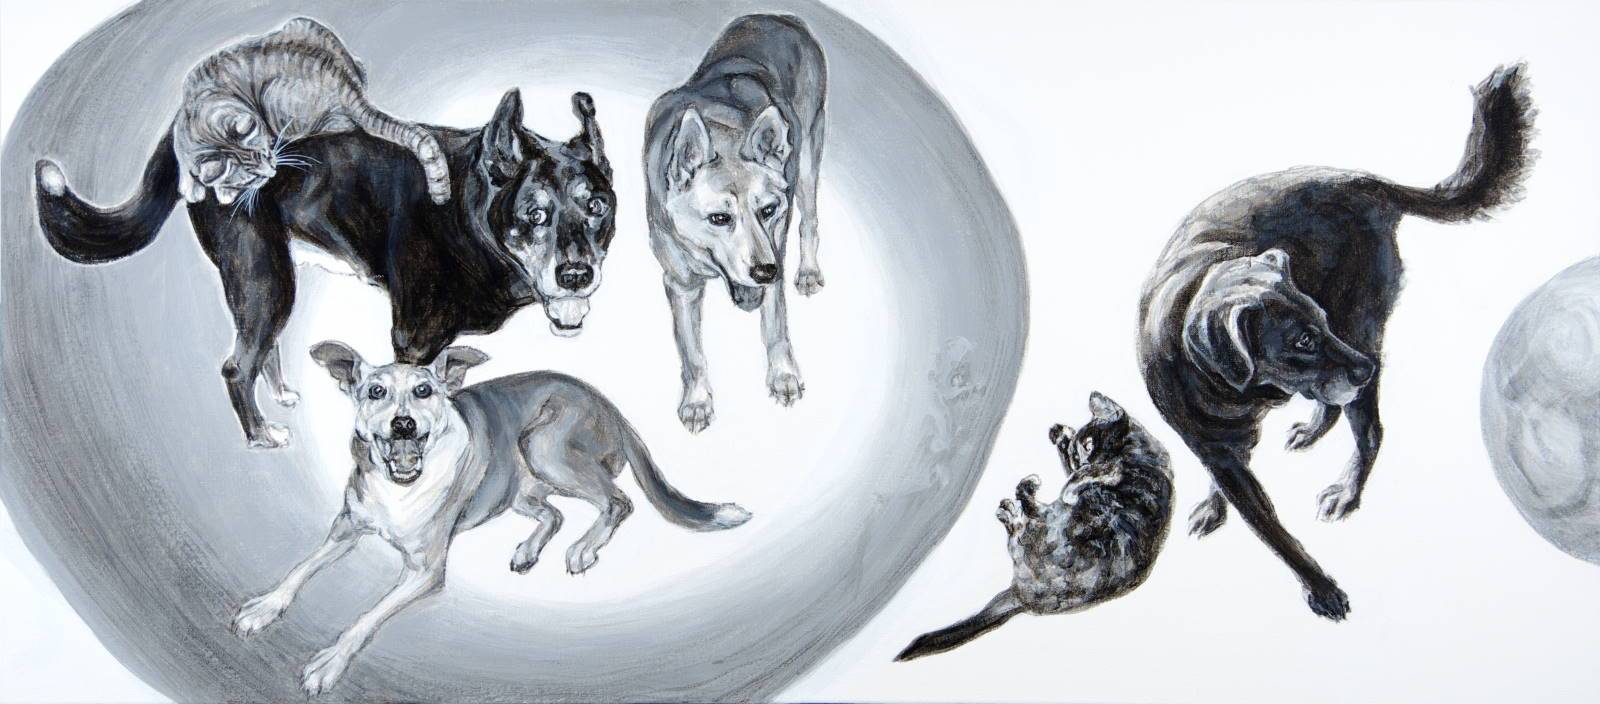 Absorbed family portrait of domestic animals arranged in orbs. A painting depicting 4 dogs and two cats within and outside a large circle with a smaller circle reflecting one of the dogs. A black and white acrylic painting by Elizabeth Lisa Petrulis